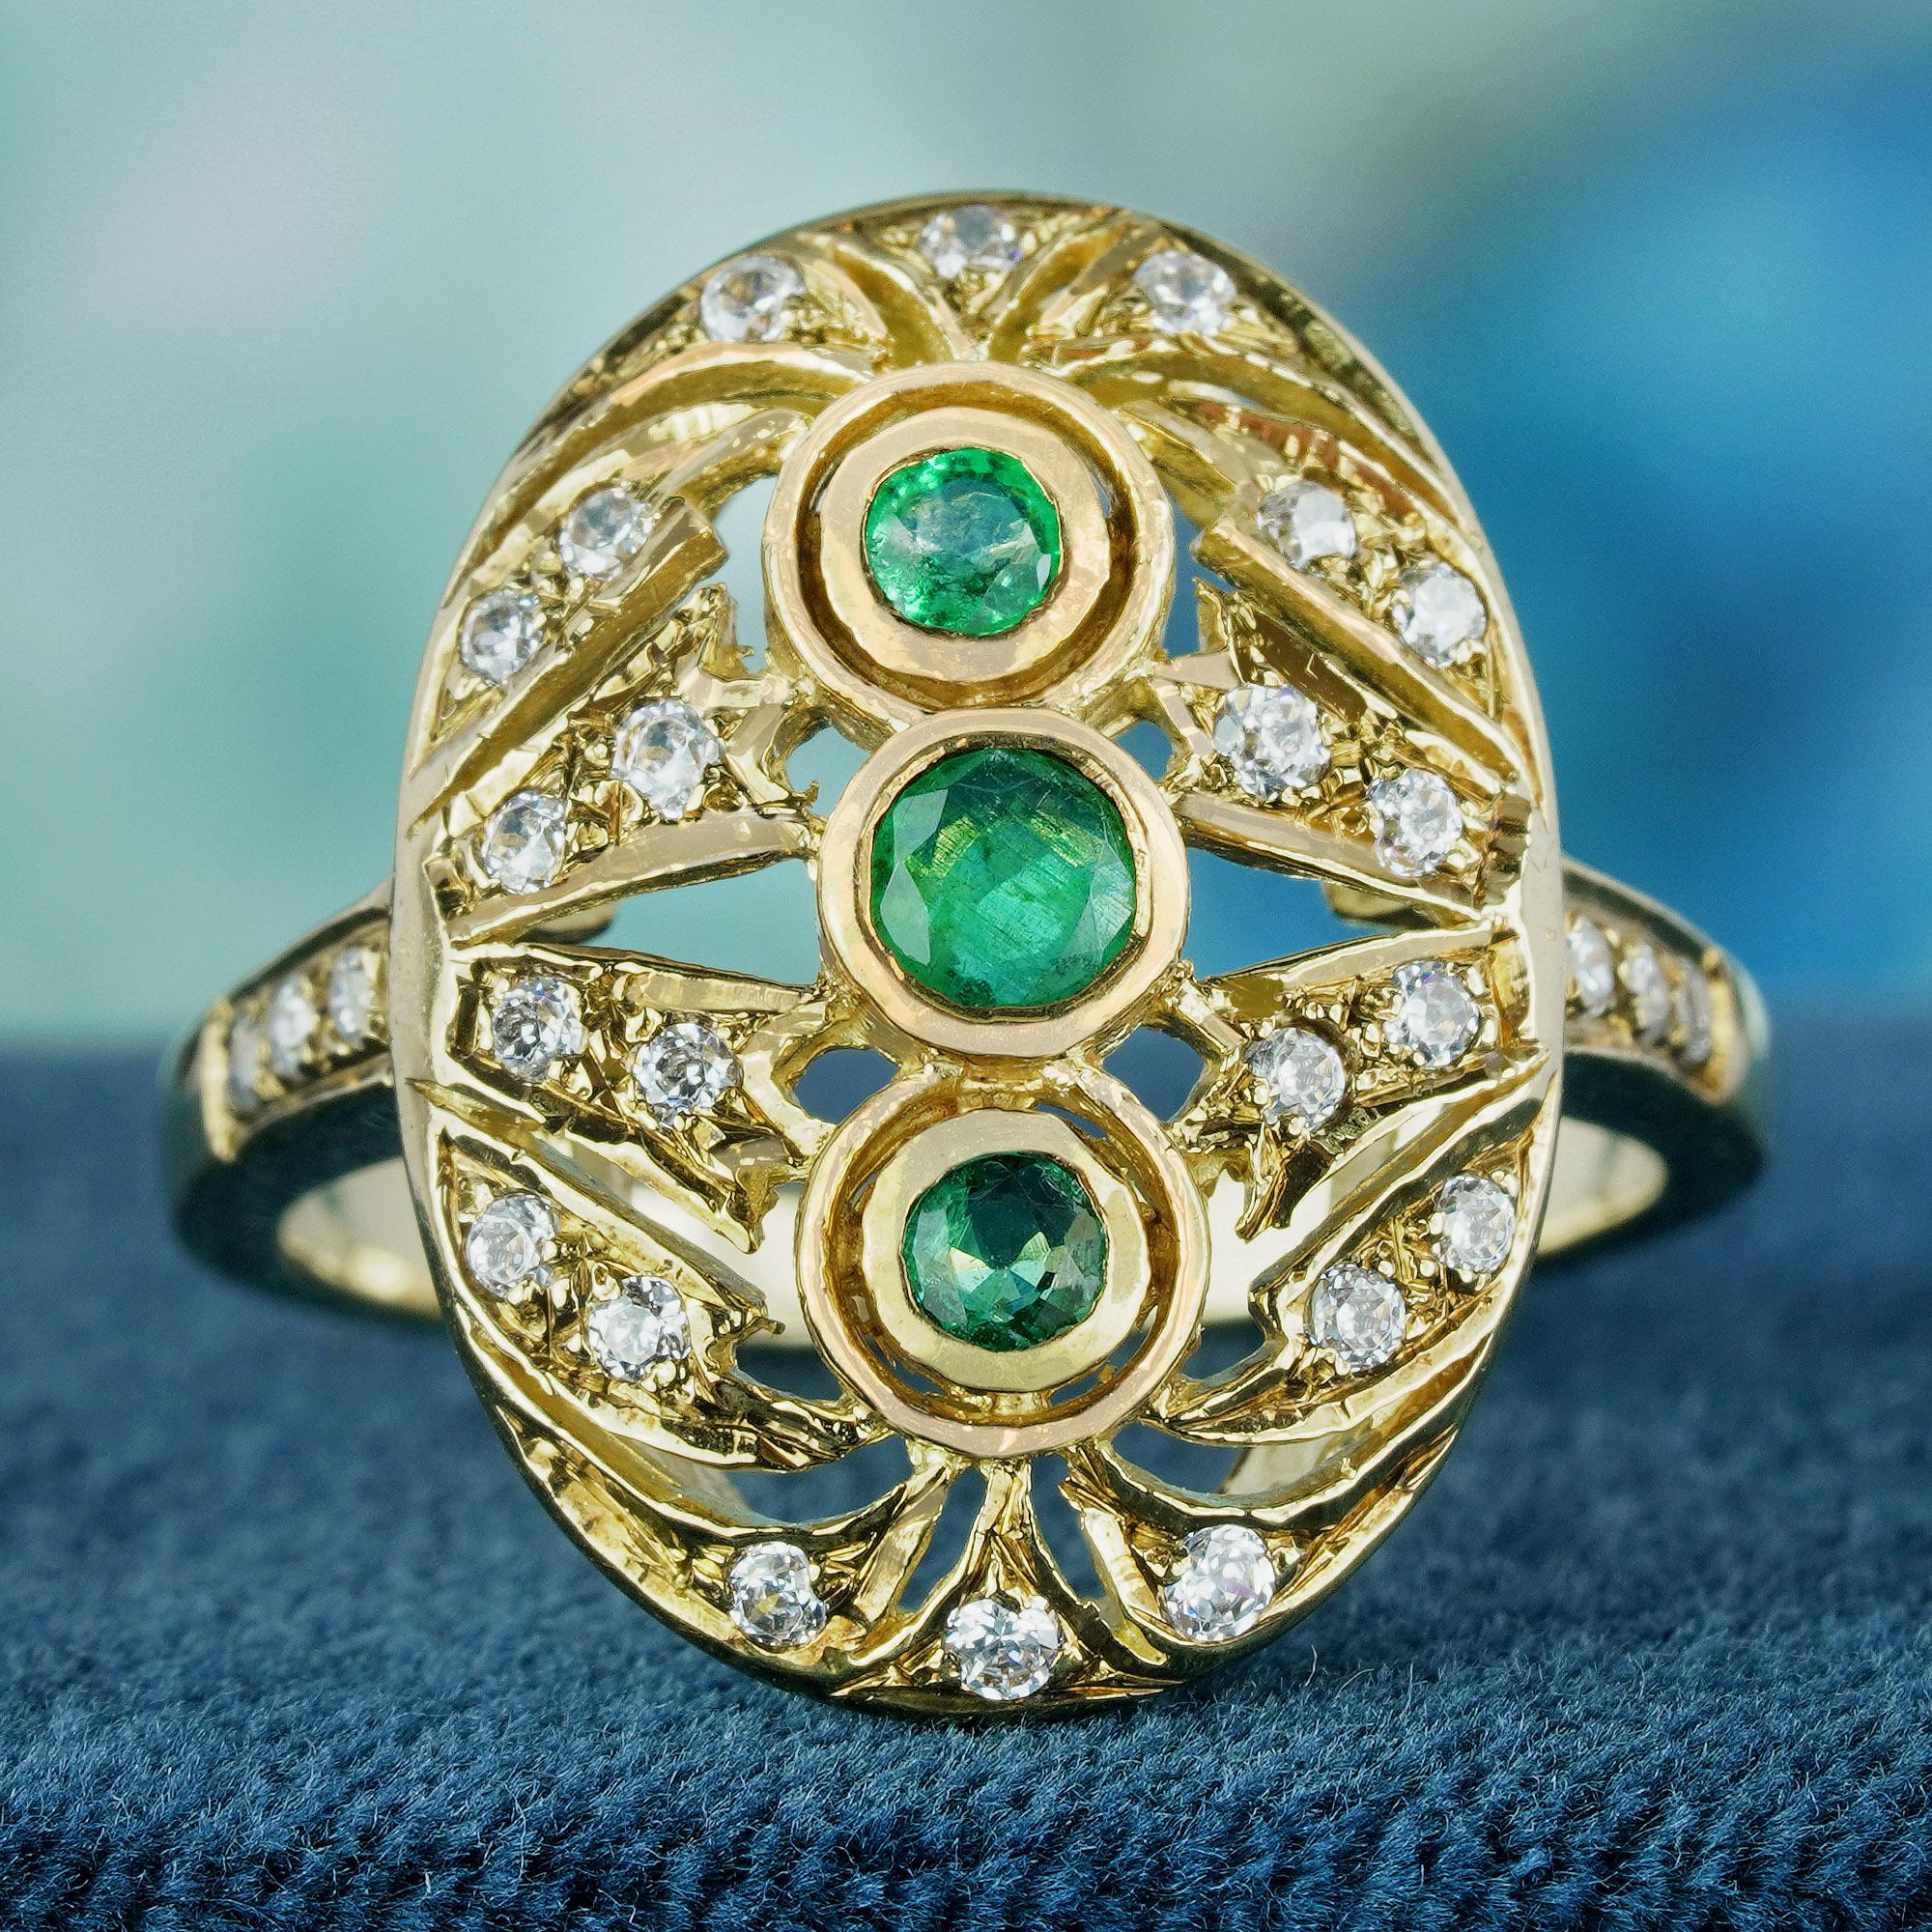 At the heart of this ring lies three mesmerizing round-cut emeralds. Crafted in radiant yellow gold, this vintage-inspired oval filigree ring exudes timeless elegance. The band's shoulders are adorned with diamonds, infusing a touch of luxury.